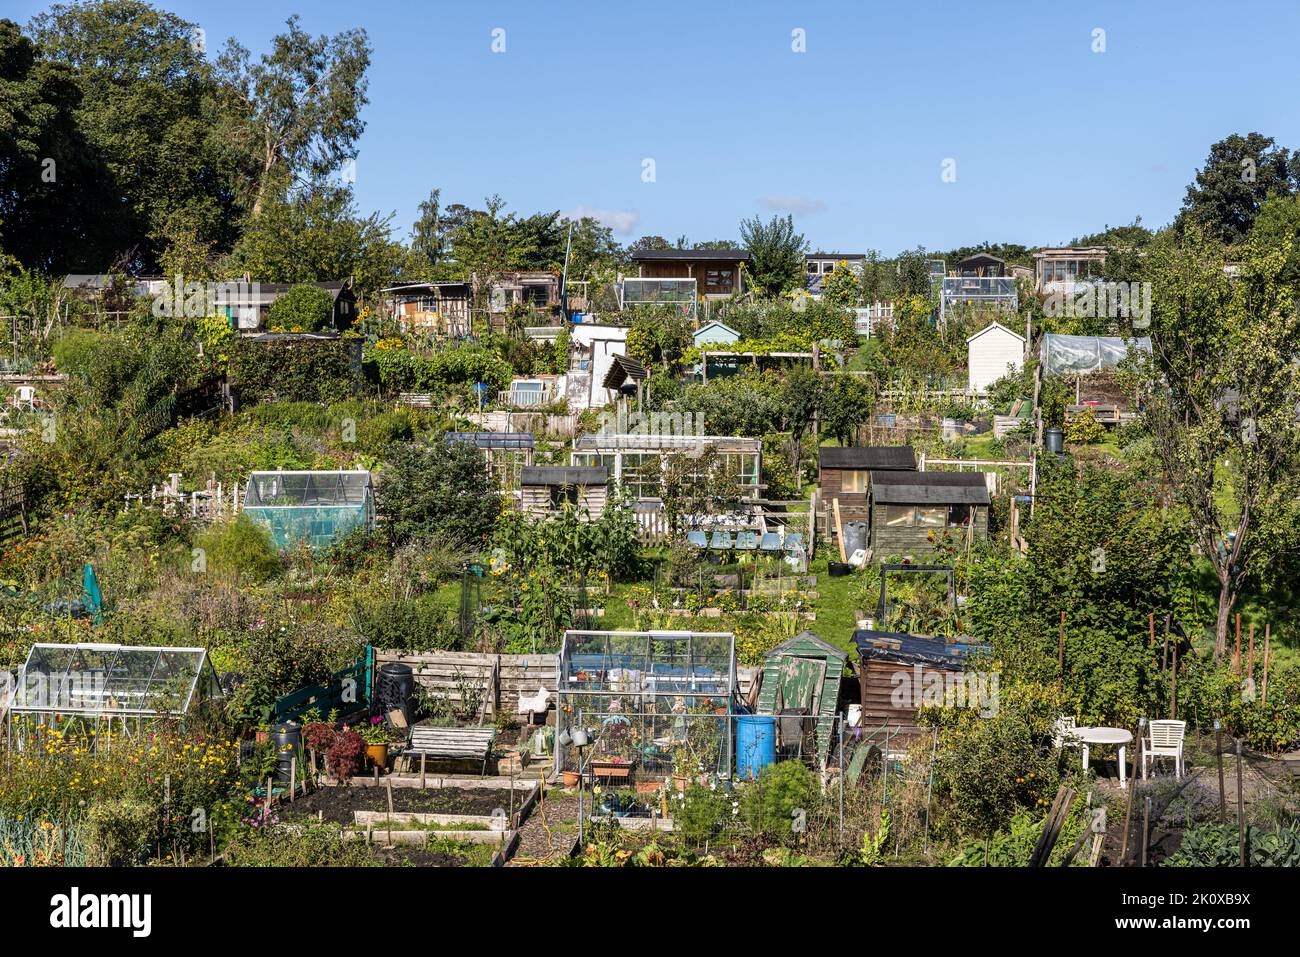 A community allotment in the centre of Edinburgh with sheds and greenhouses Stock Photo